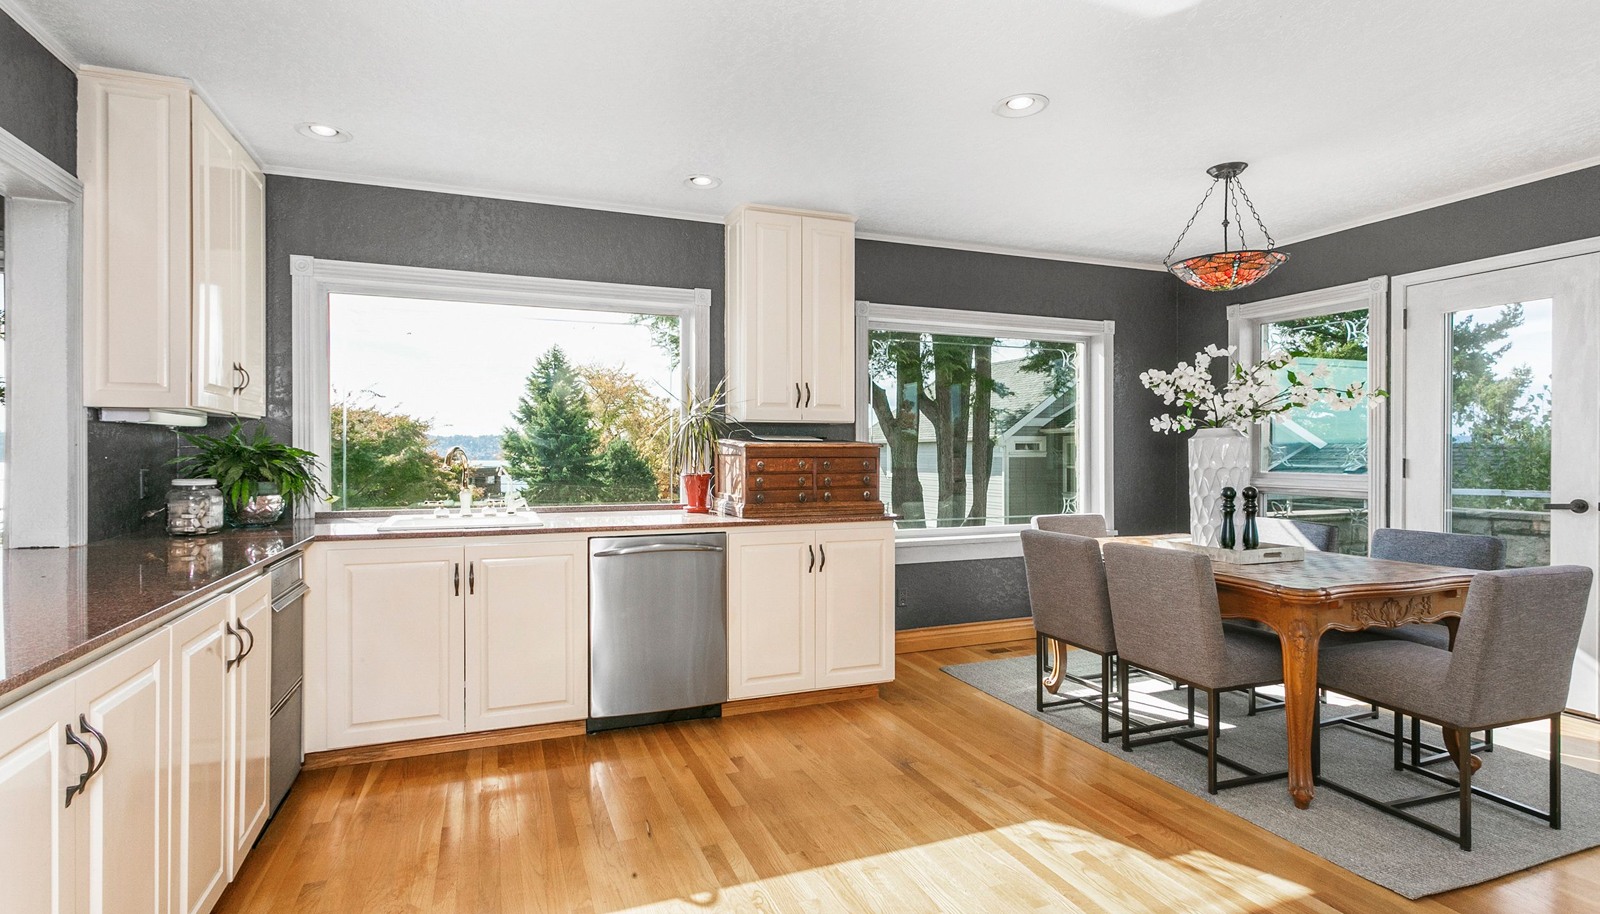 Huge windows to take in the view while you cook, eat or entertain. A second sink, acres of counter space and second dishwasher make prep and cleanup a breeze.